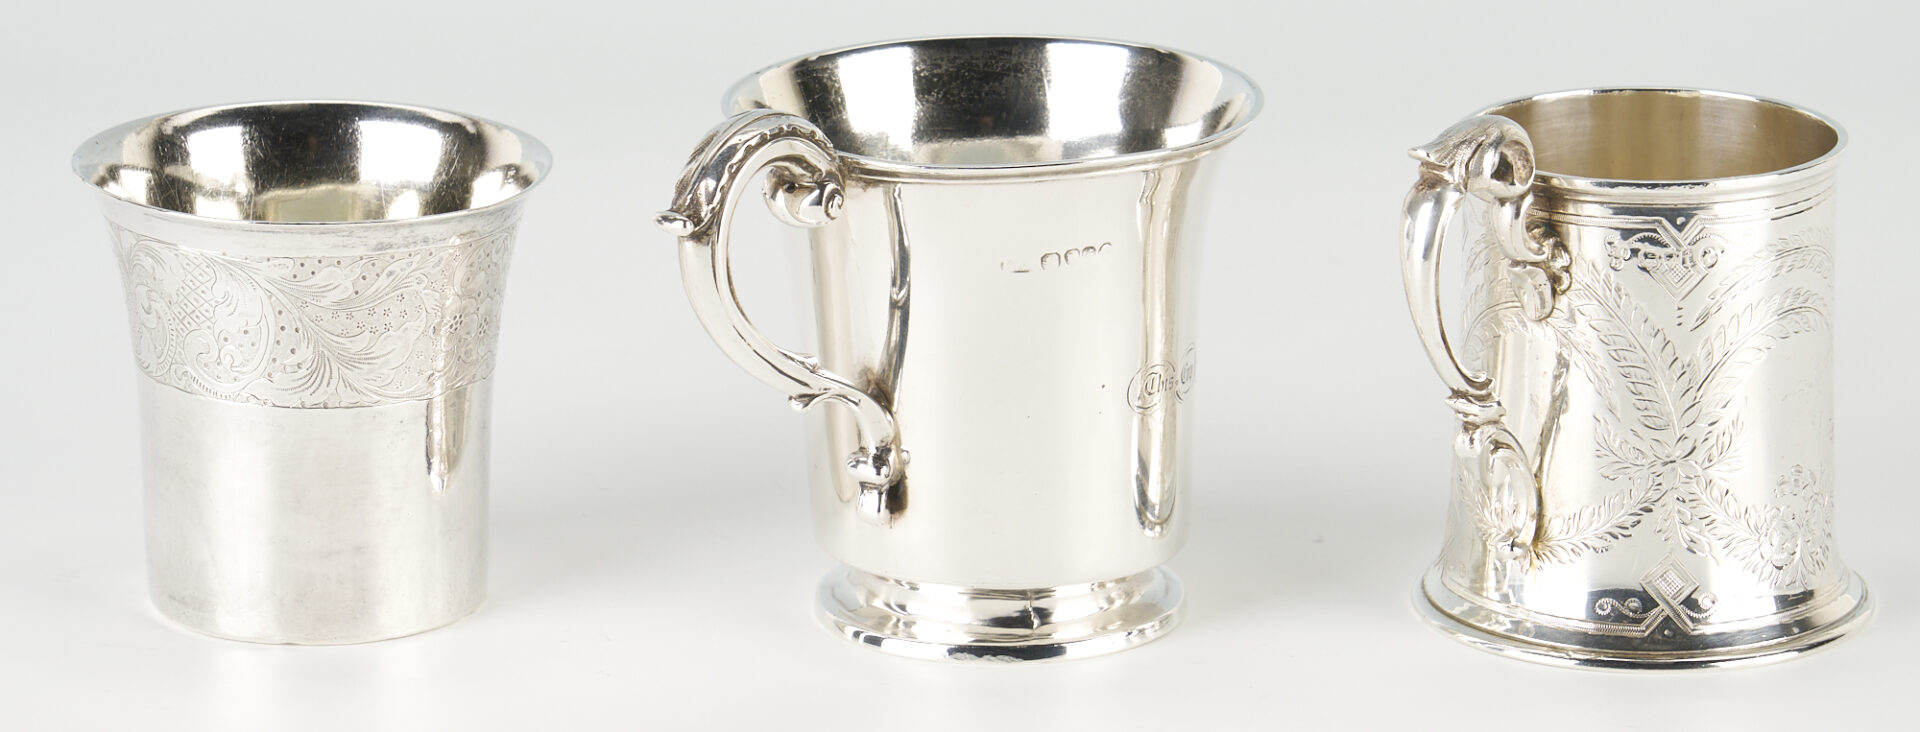 Lot 45: 3 English Sterling Silver Agricultural presentation cups